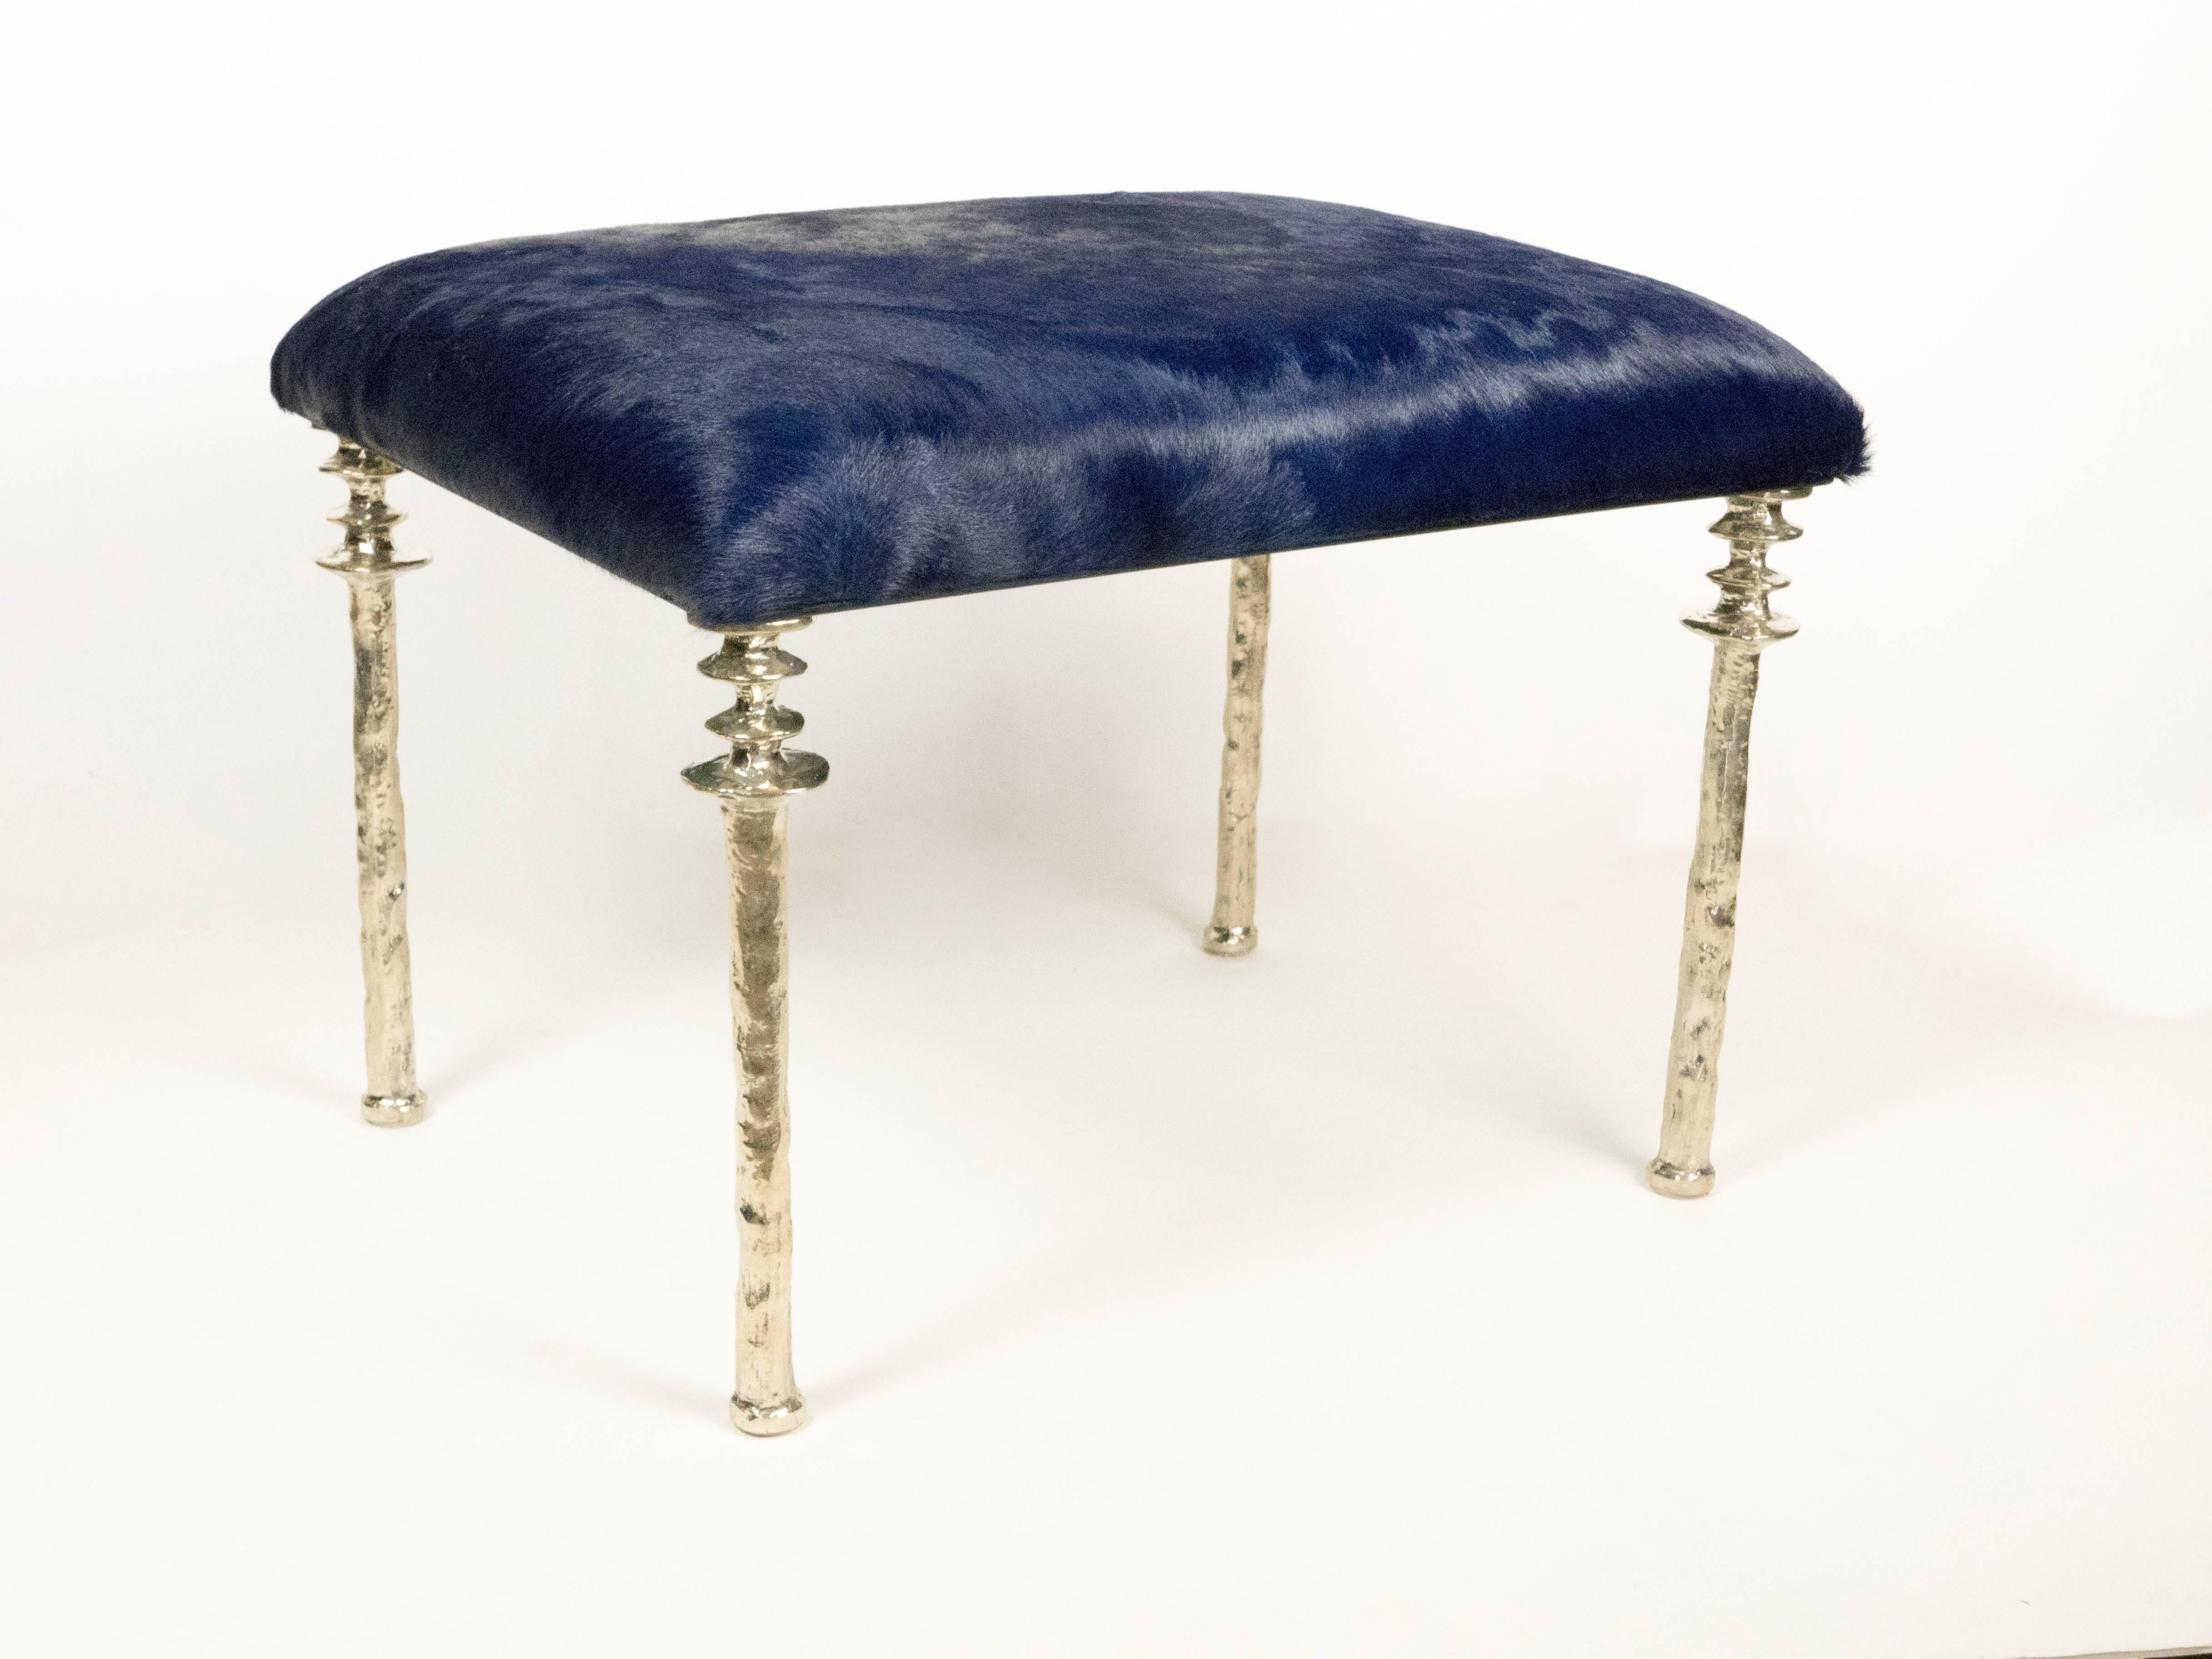 Two beautiful stools inspired by Diego Giacometti, these stools are ideal for those who are looking for unique seating. Their cast white bronze legs provide
a truely organic touch. The seat cushion has been upholstered in a navy blue
cow hide.